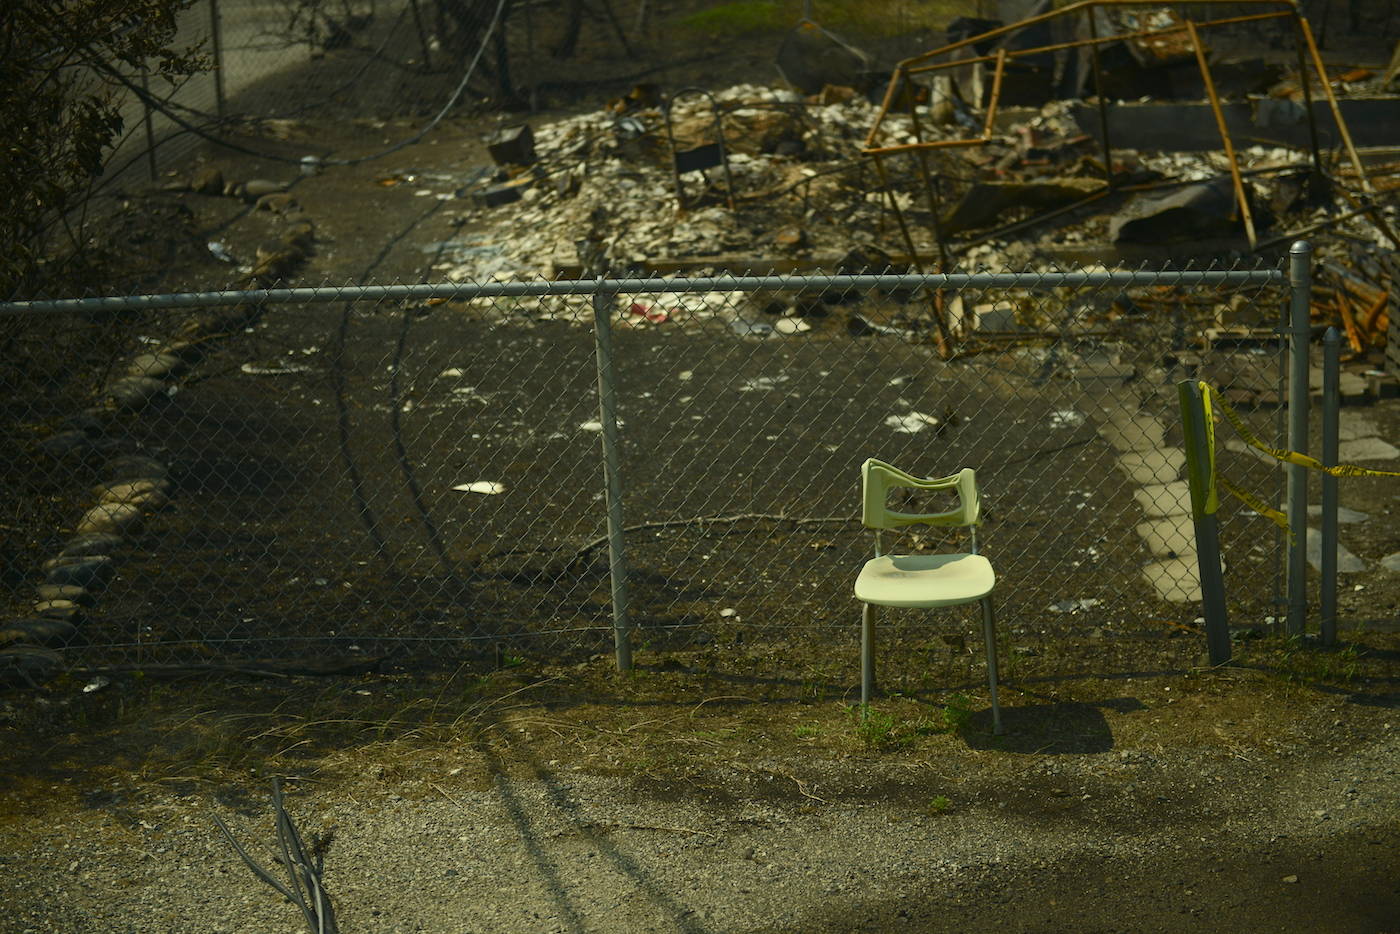 A chair sits on Main Street in Lytton, B.C. on Friday, July 9, 2021, nine days after a wildfire ripped through the village on June 30, 2021. (Jenna Hauck/ Black Press Media)